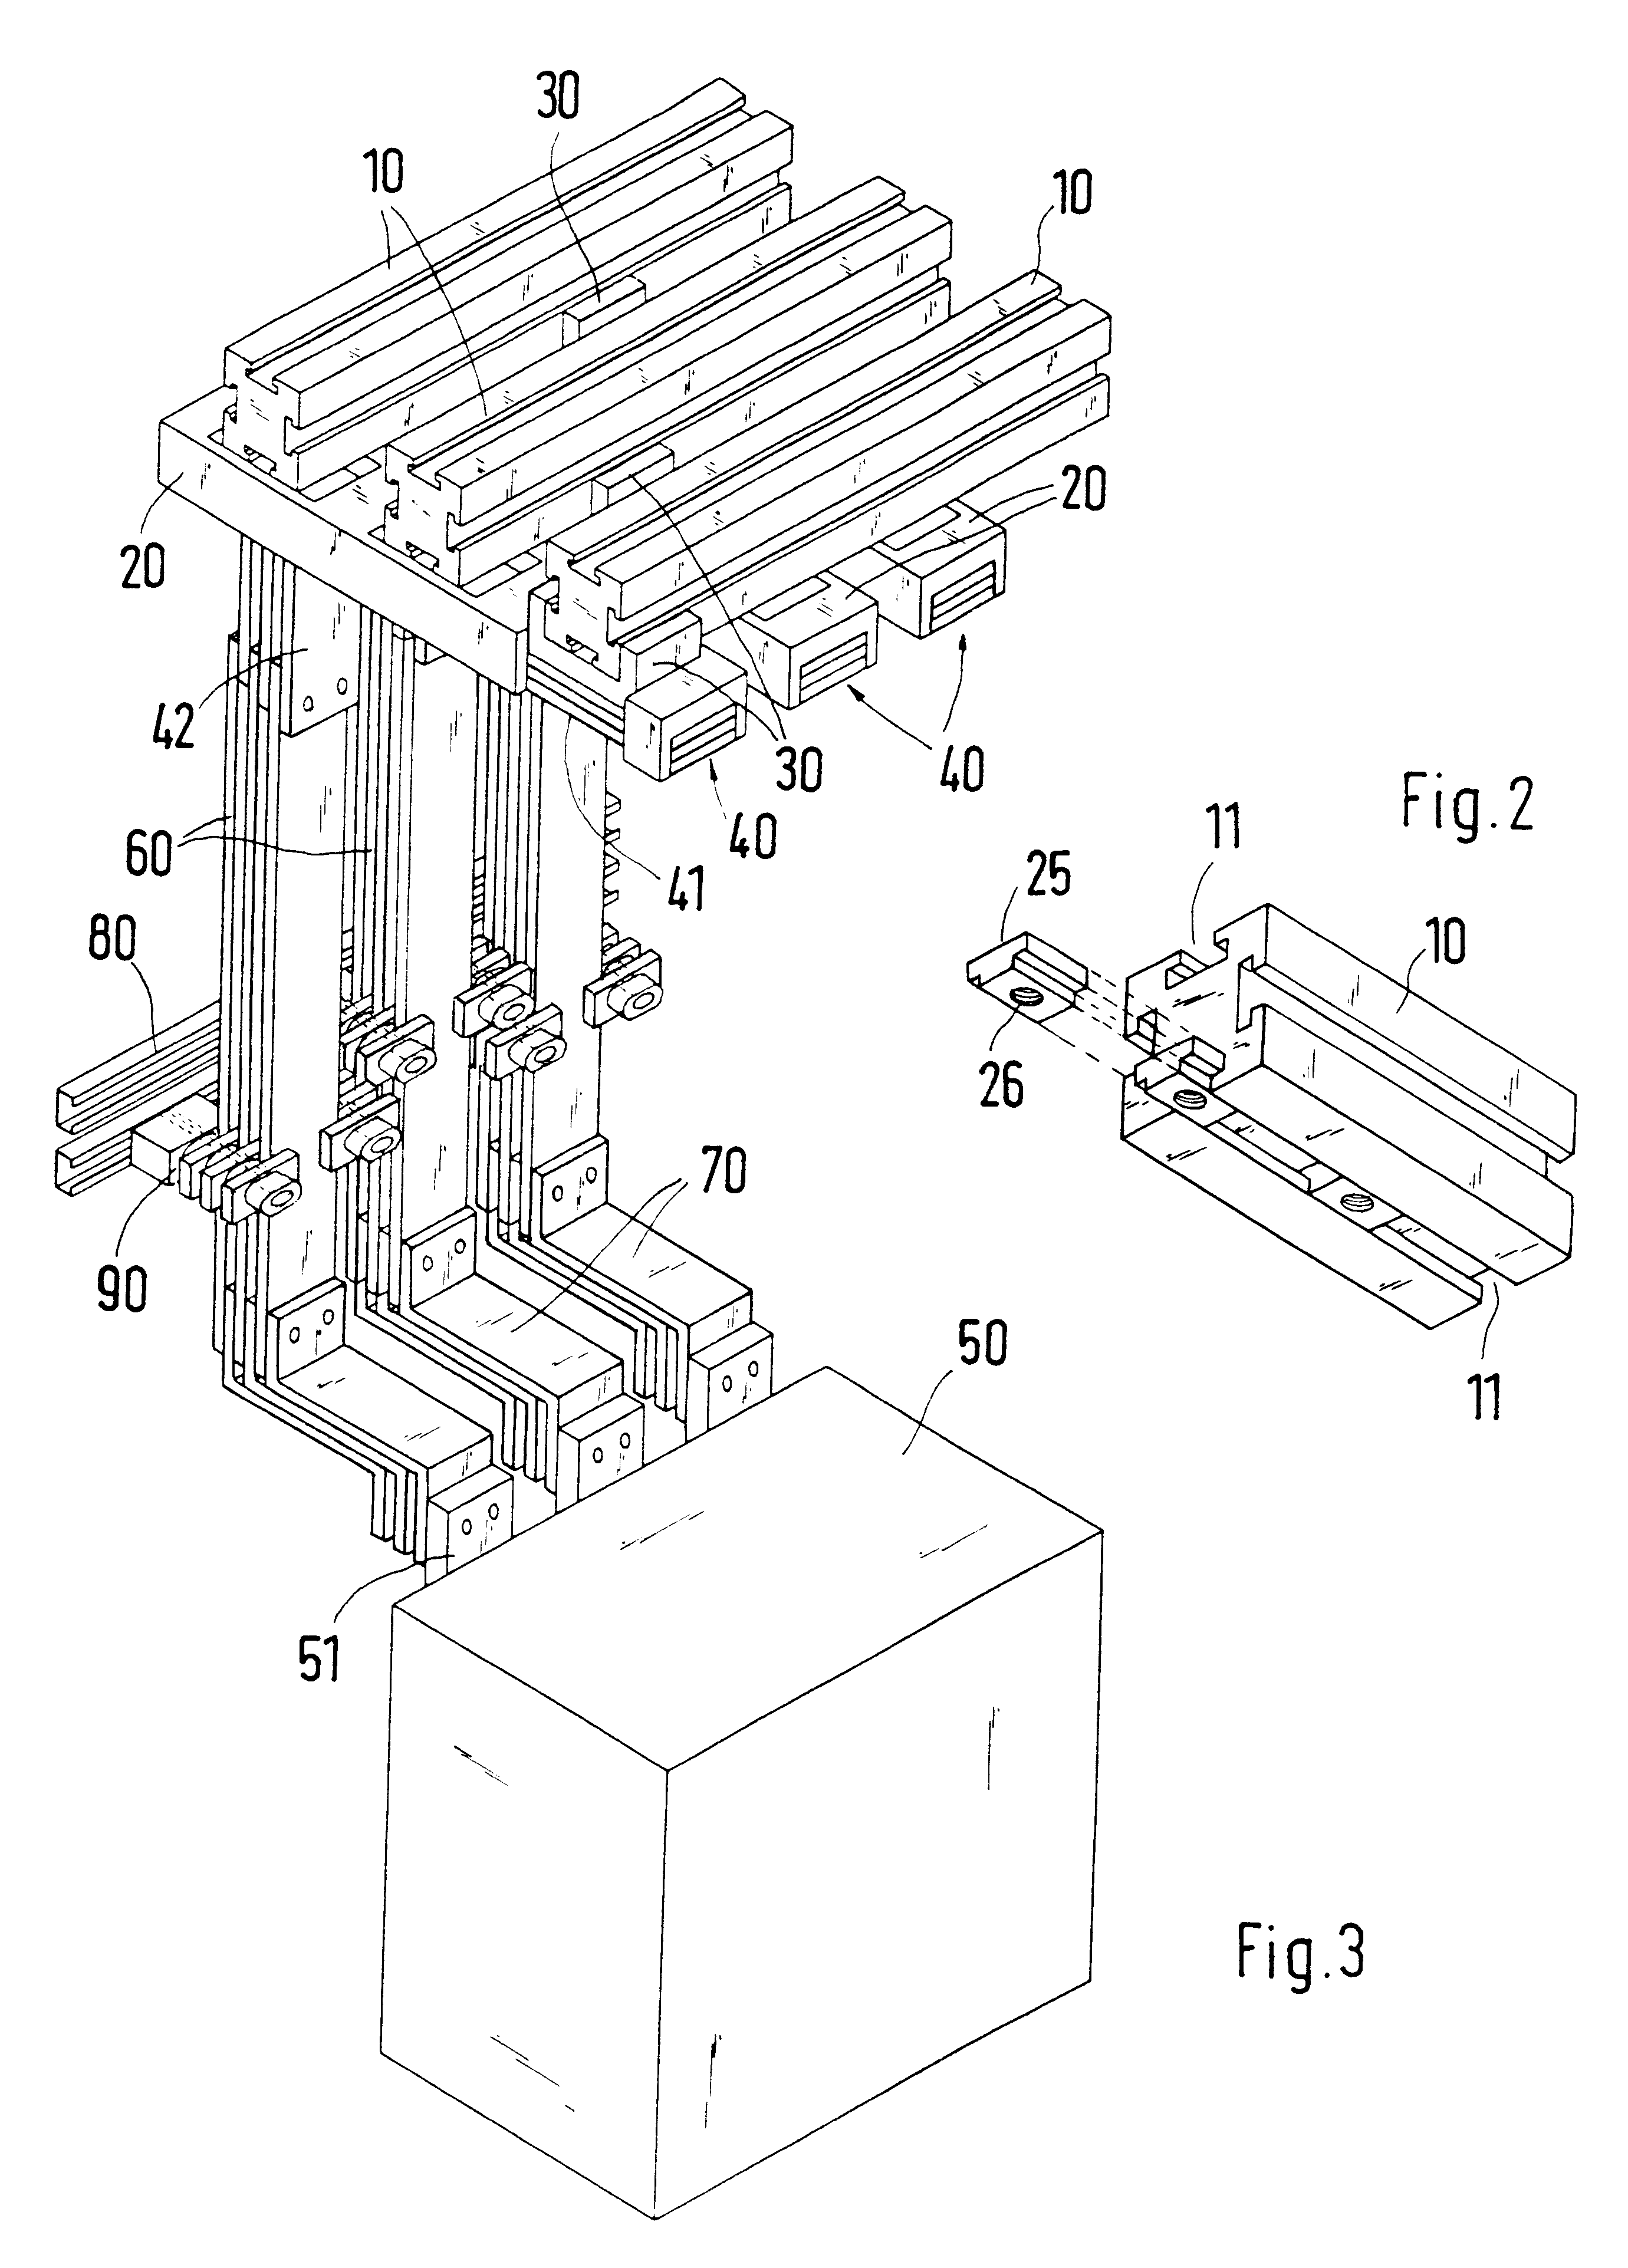 Bus bar system with several bus bars and an installation device with flat connectors